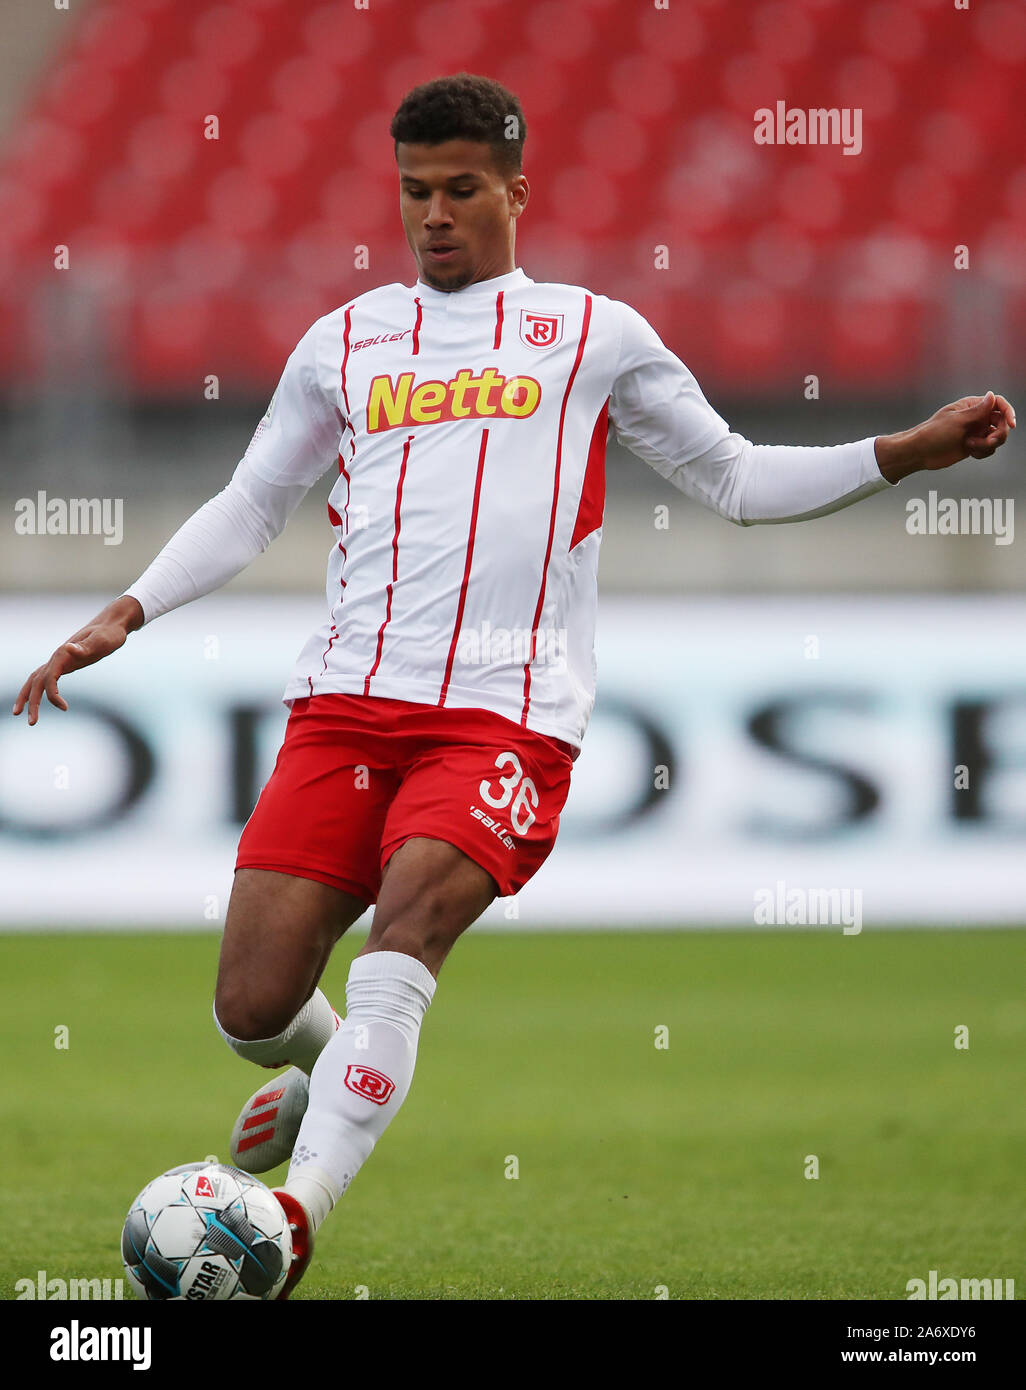 Nuremberg, Germany. 27th Oct, 2019. Soccer: 2nd Bundesliga, 1st FC Nuremberg - Jahn Regensburg, 11th matchday in Max Morlock Stadium. The Regensburg Chima Okoroji plays the ball. Credit: Daniel Karmann/dpa - IMPORTANT NOTE: In accordance with the requirements of the DFL Deutsche Fußball Liga or the DFB Deutscher Fußball-Bund, it is prohibited to use or have used photographs taken in the stadium and/or the match in the form of sequence images and/or video-like photo sequences./dpa/Alamy Live News Stock Photo